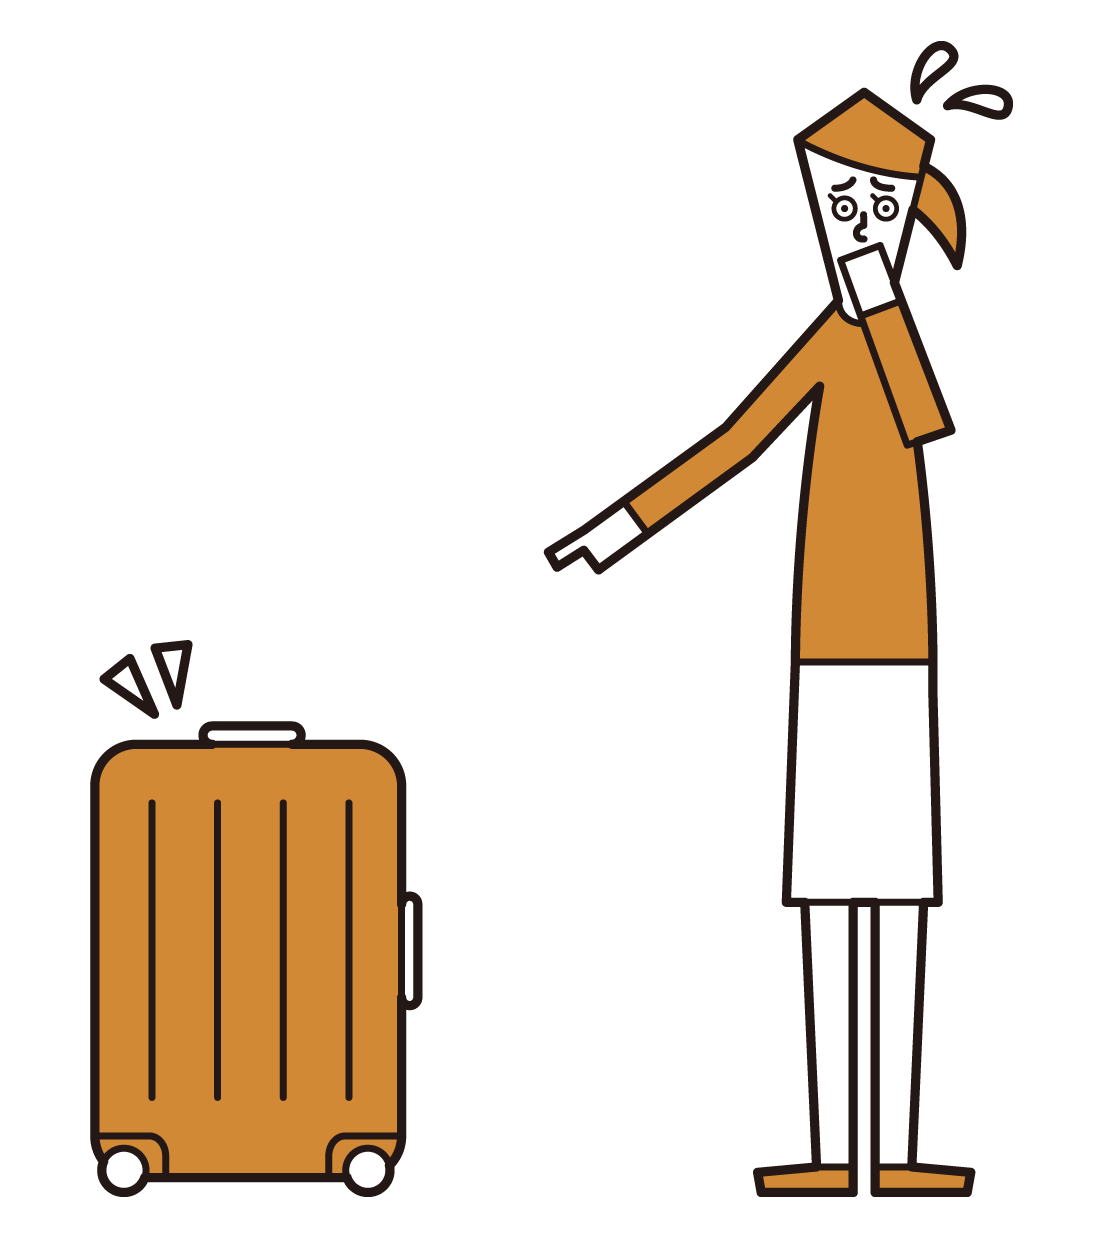 Illustration of a woman who found suspicious luggage